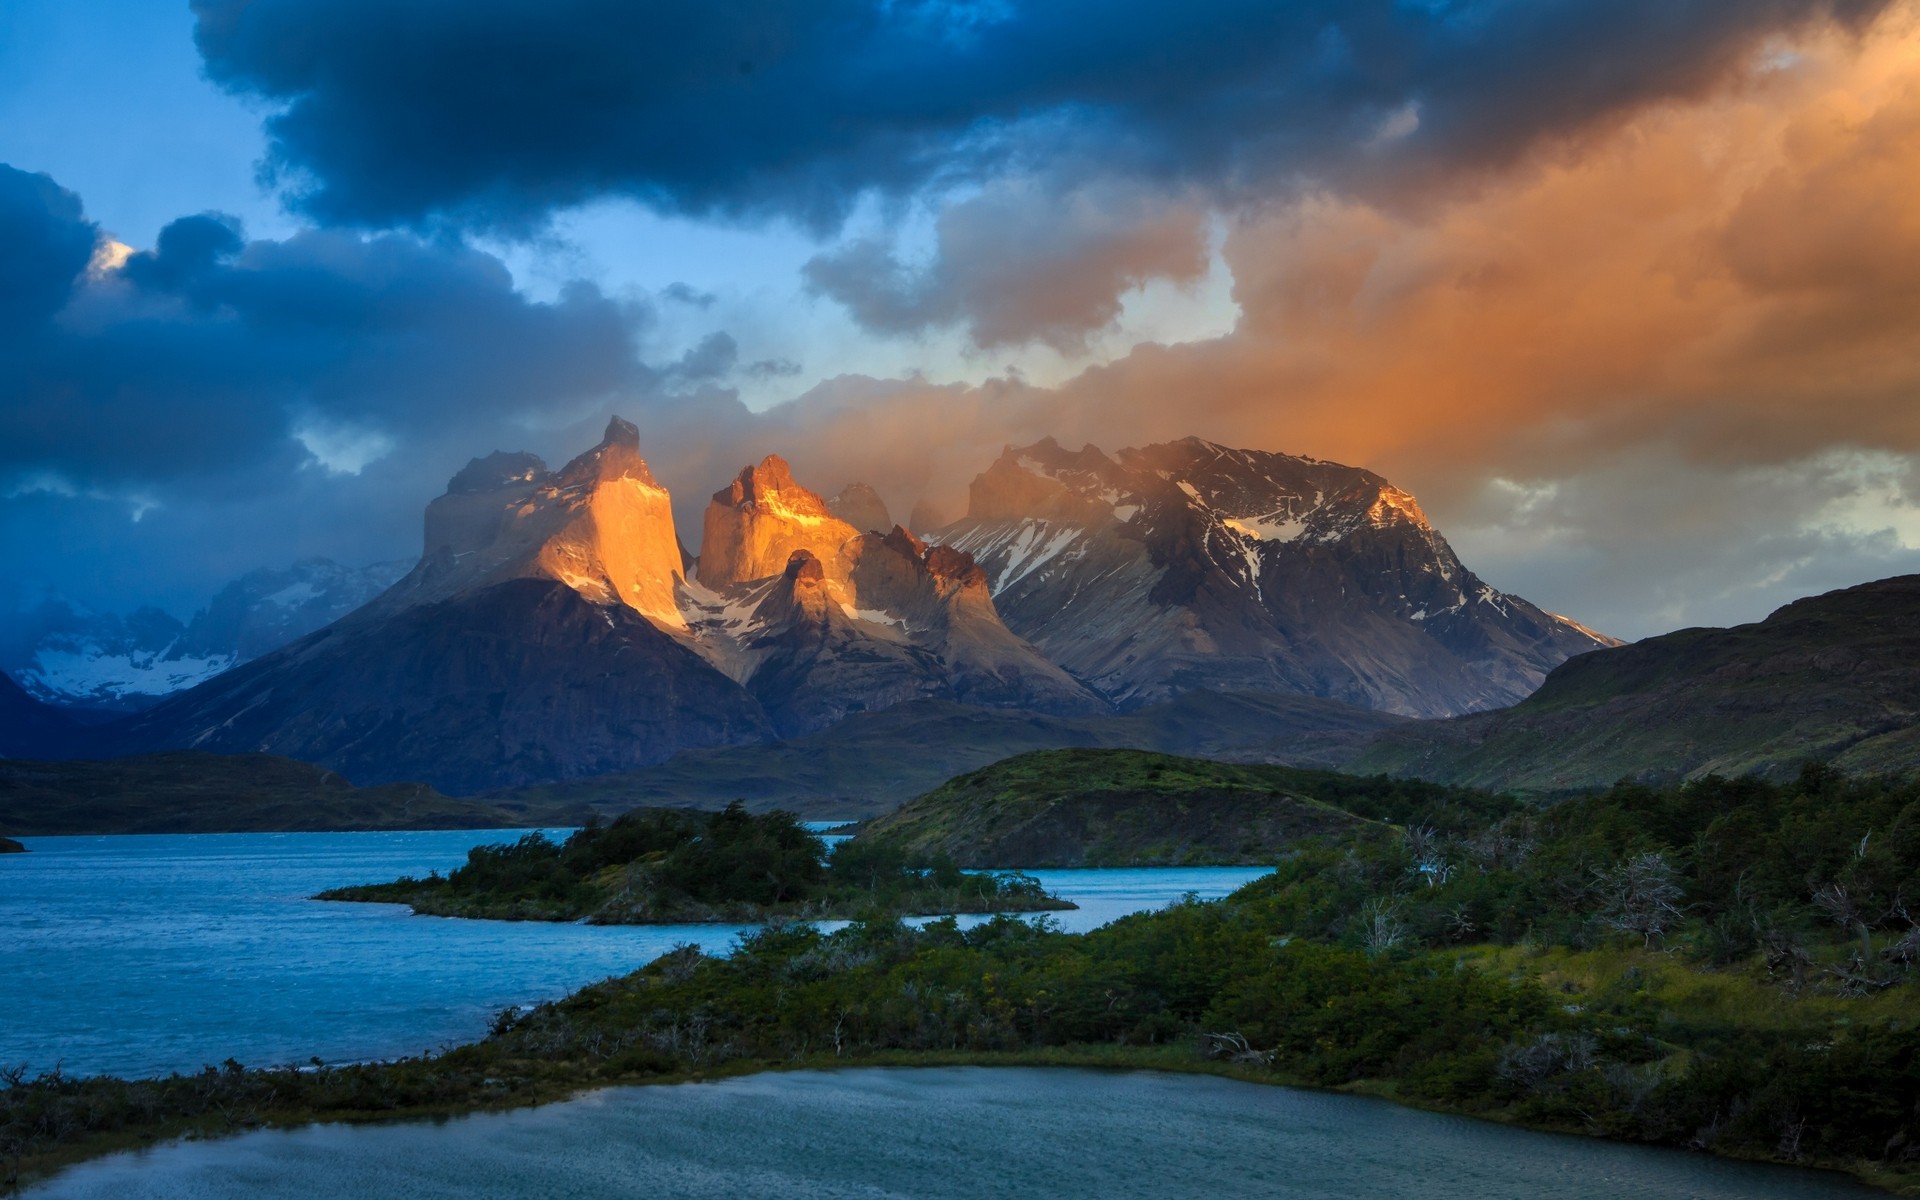 Landscape Nature Mountains Lake Clouds Chile Torres Del Paine Snowy Peak Shrubs Sunlight Trees 1920x1200